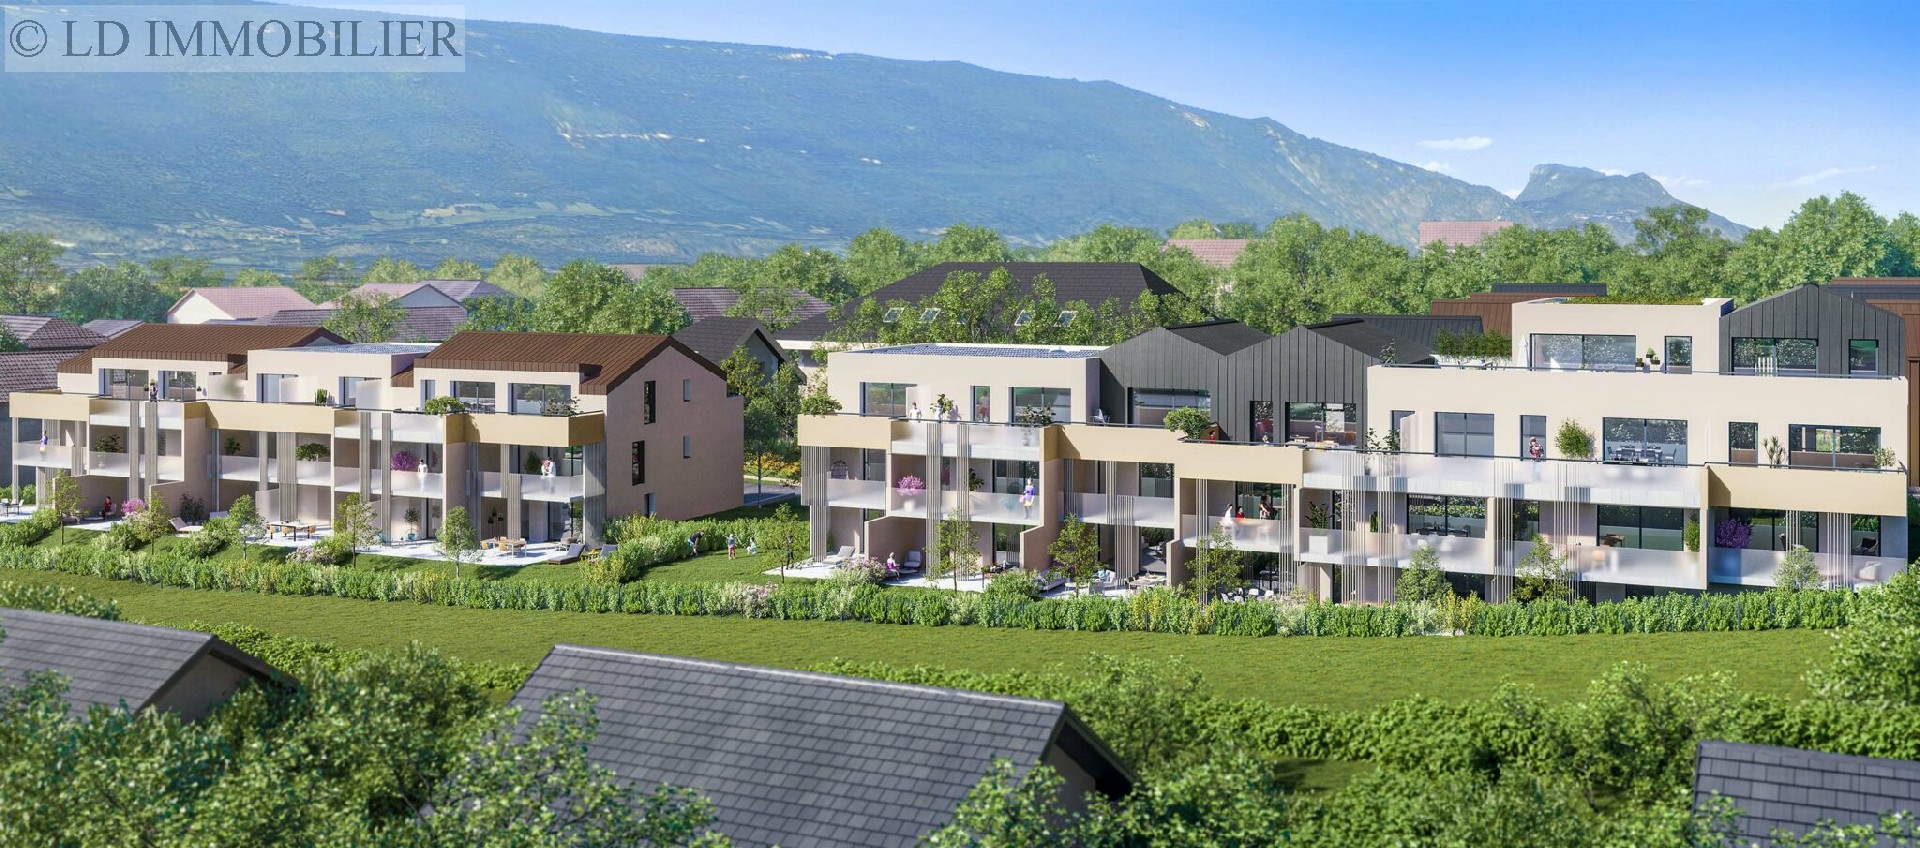 Vente appartement - CHAMBERY 69,7 m², 3 pièces